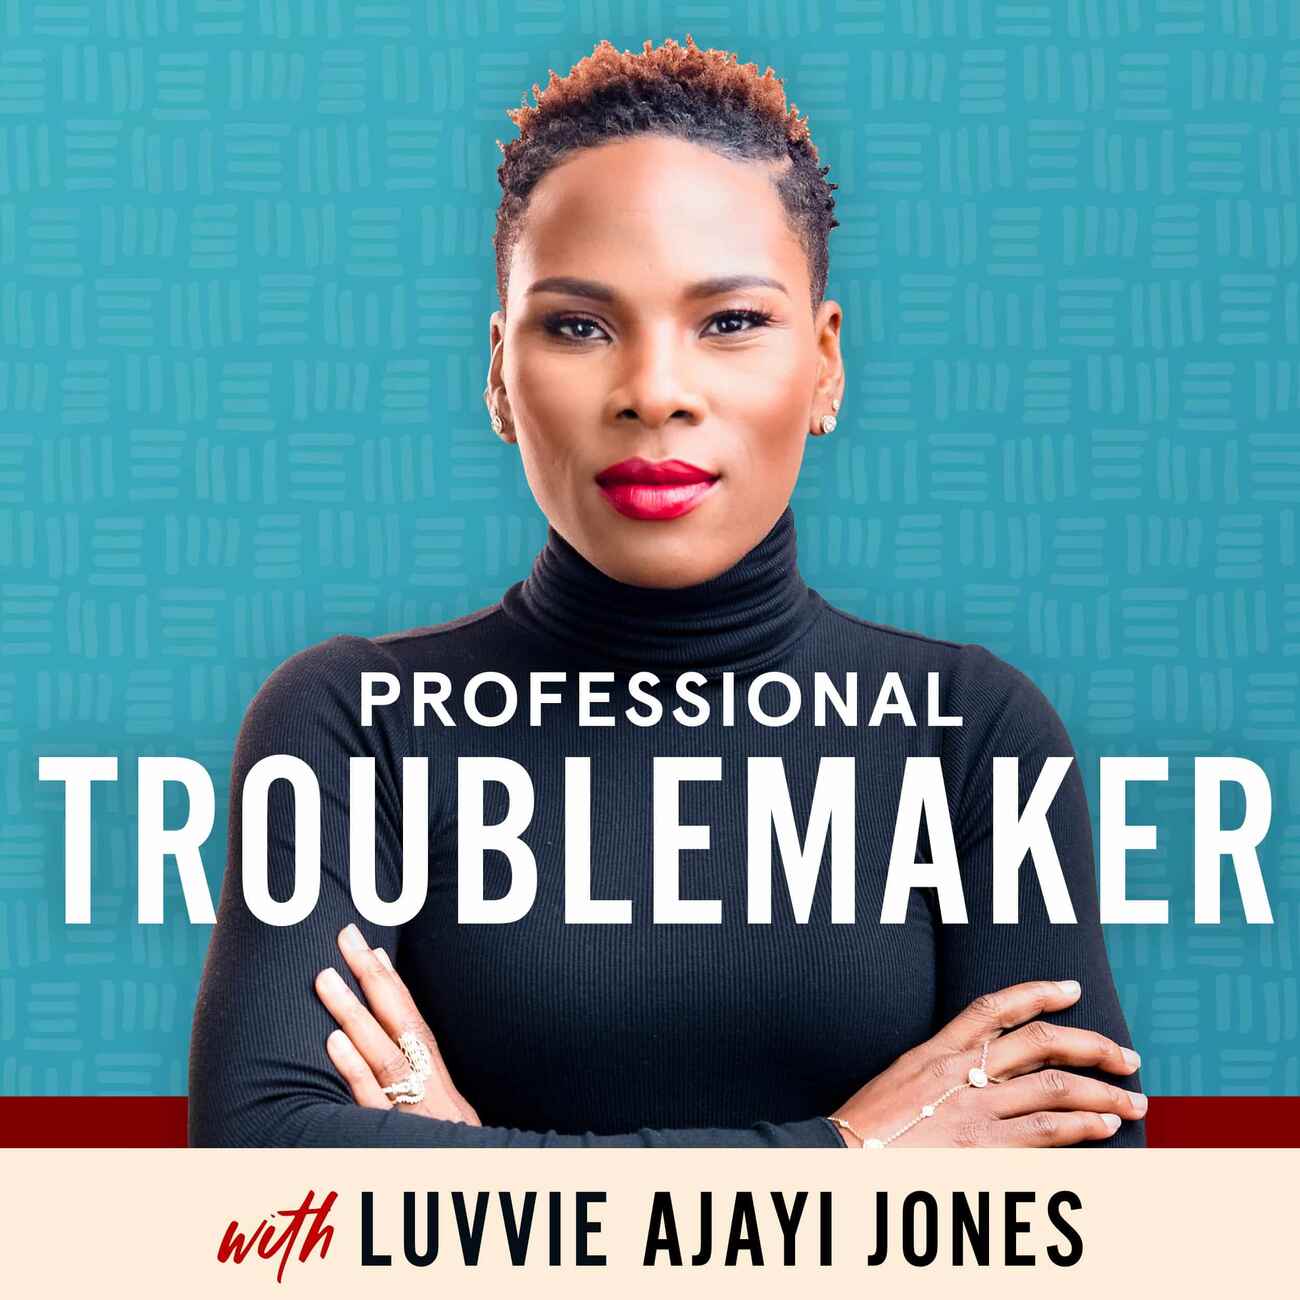 Professional Troublemaker - Podcast Cover